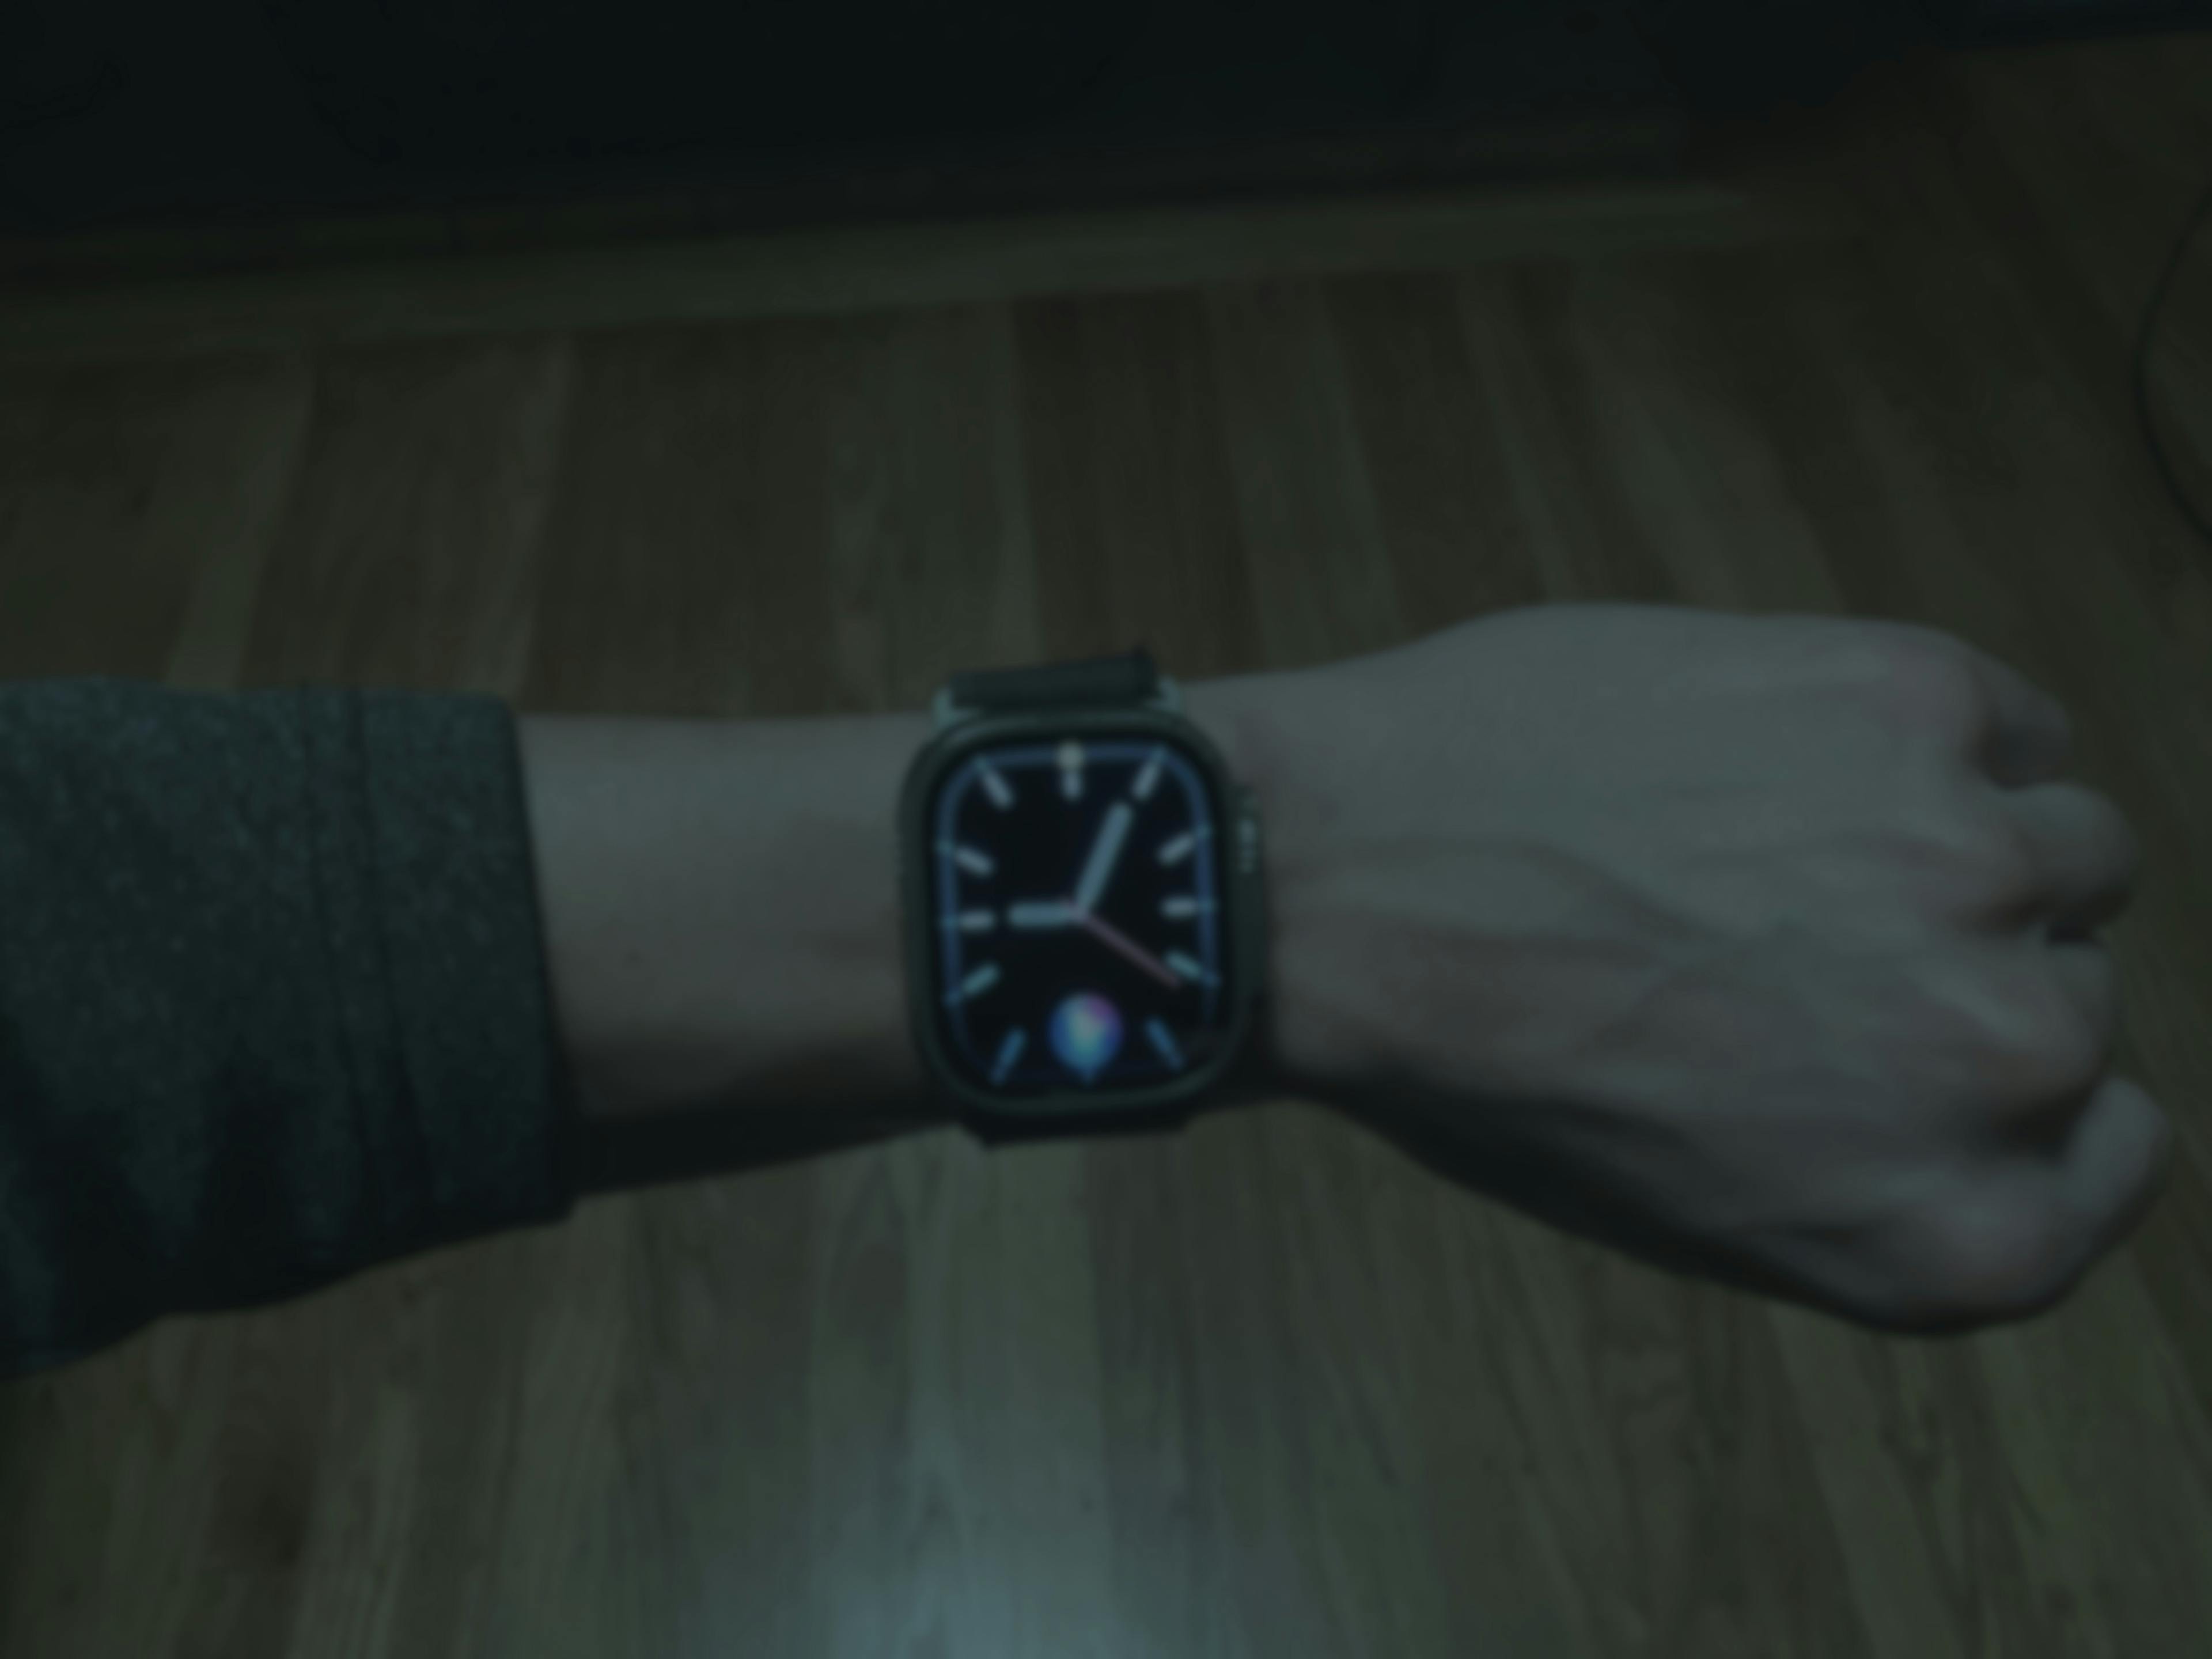 A person's wrist with Siri activated on an AppleWatch